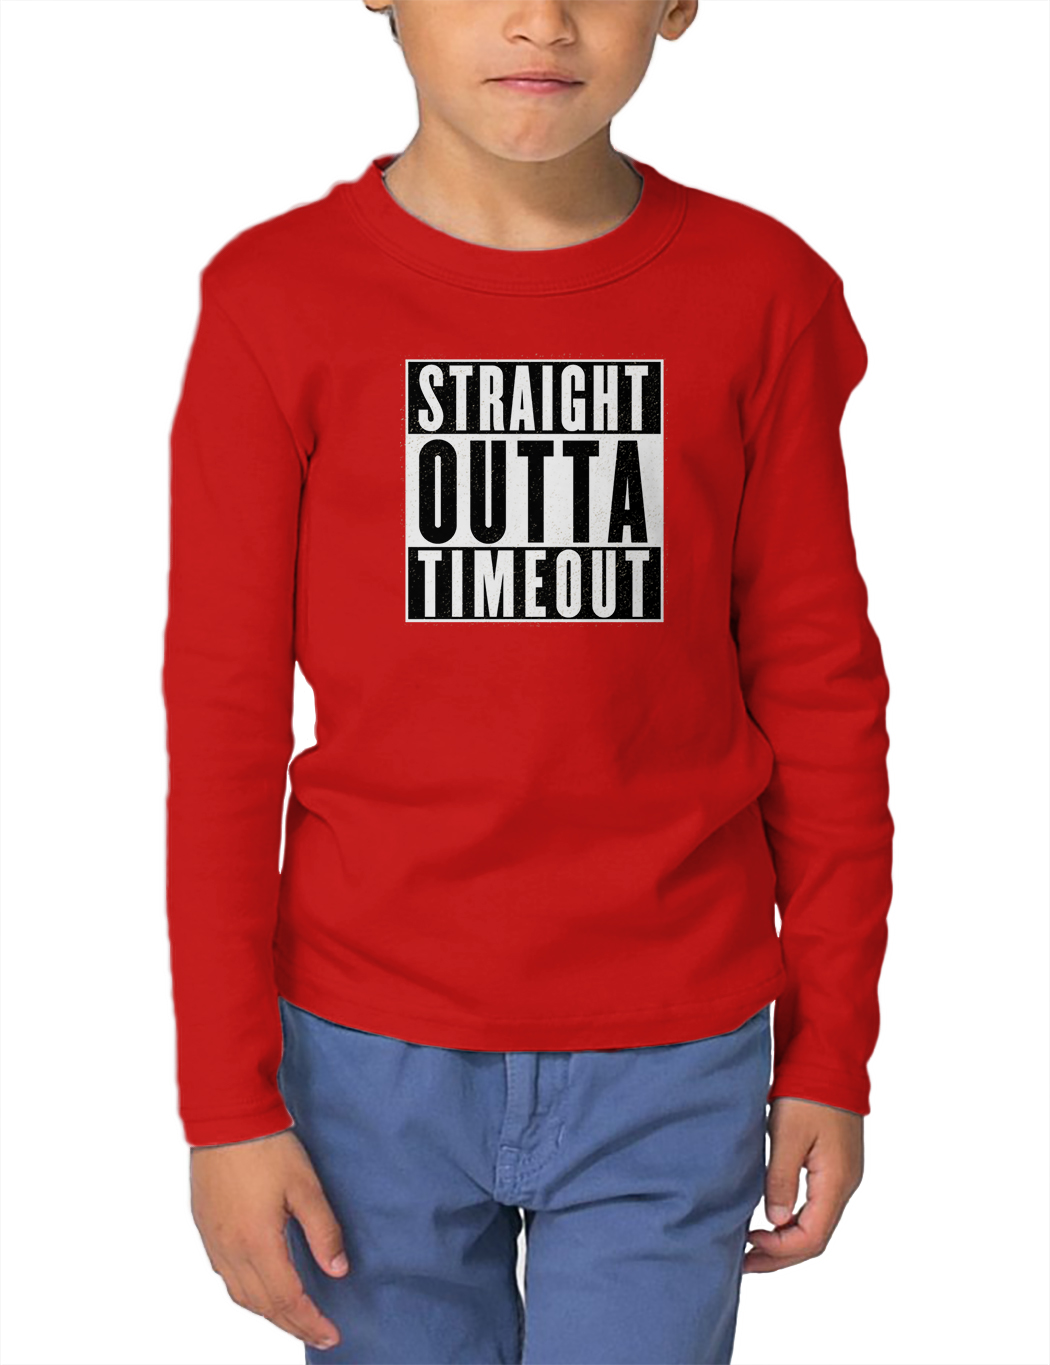 Straight Outta Timeout Trouble Maker Bad Naughty CHILDTEE 